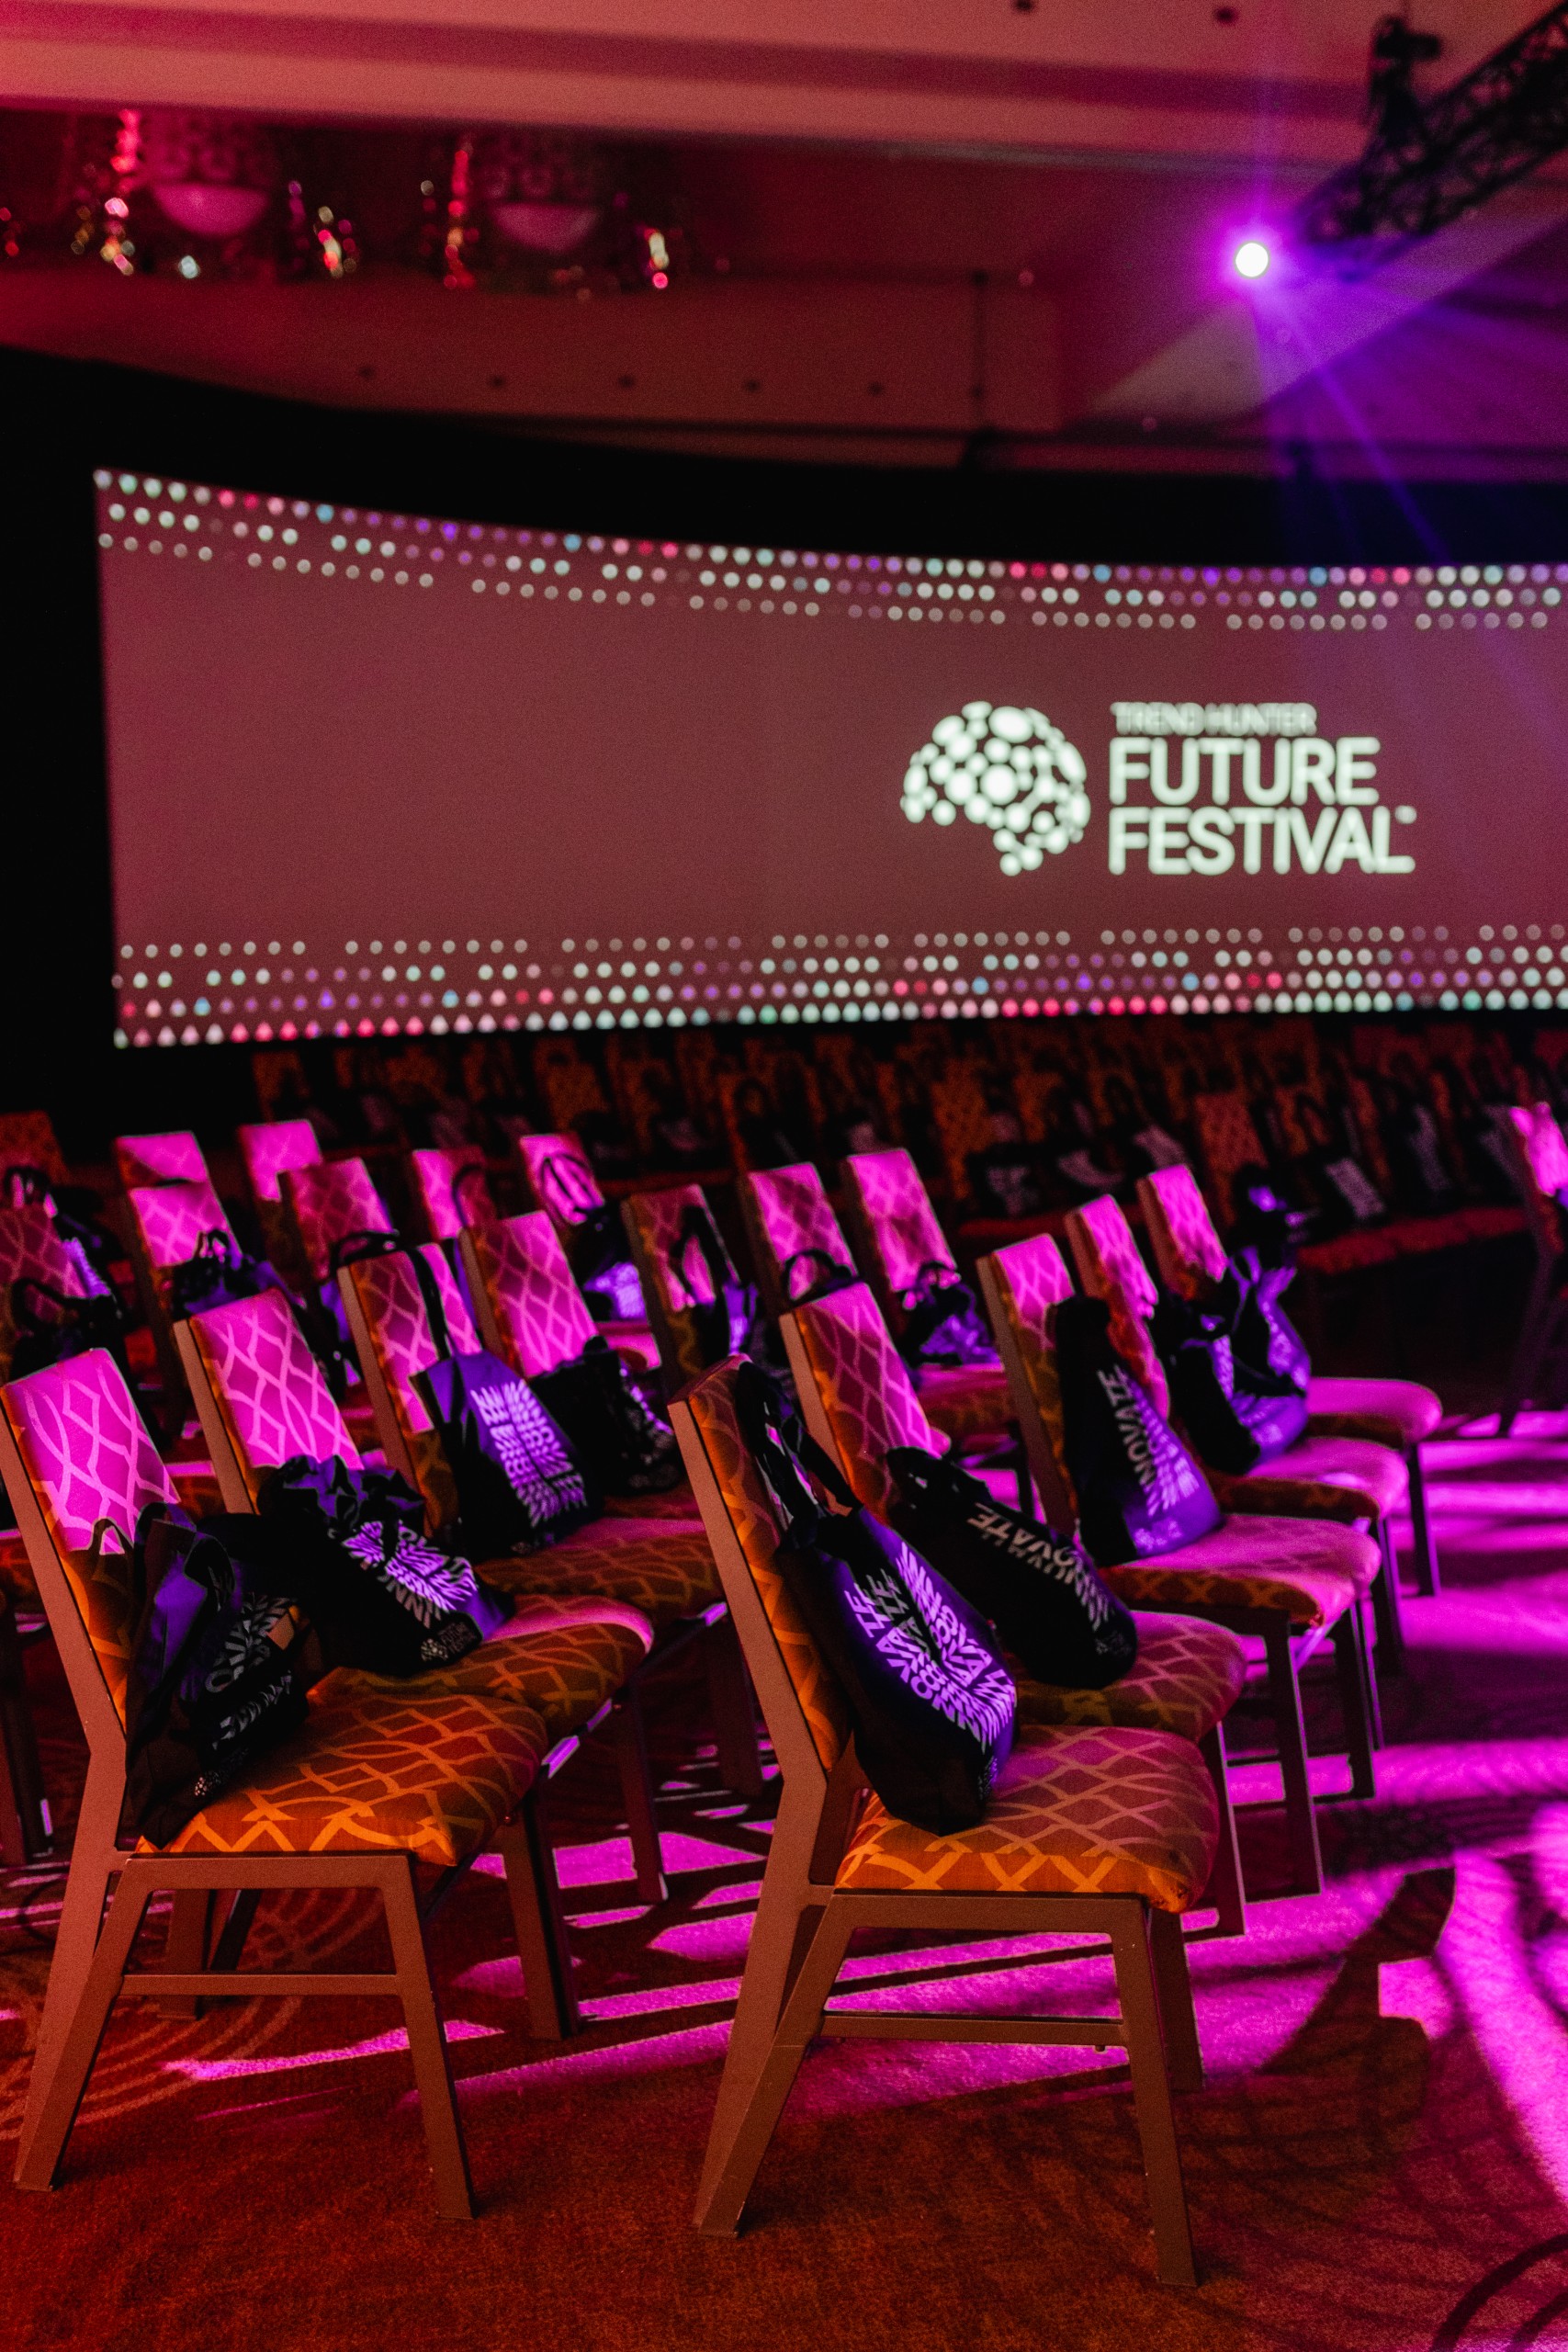 A room full of chairs and a screen displaying the word "future festival", capturing the essence through event photography.